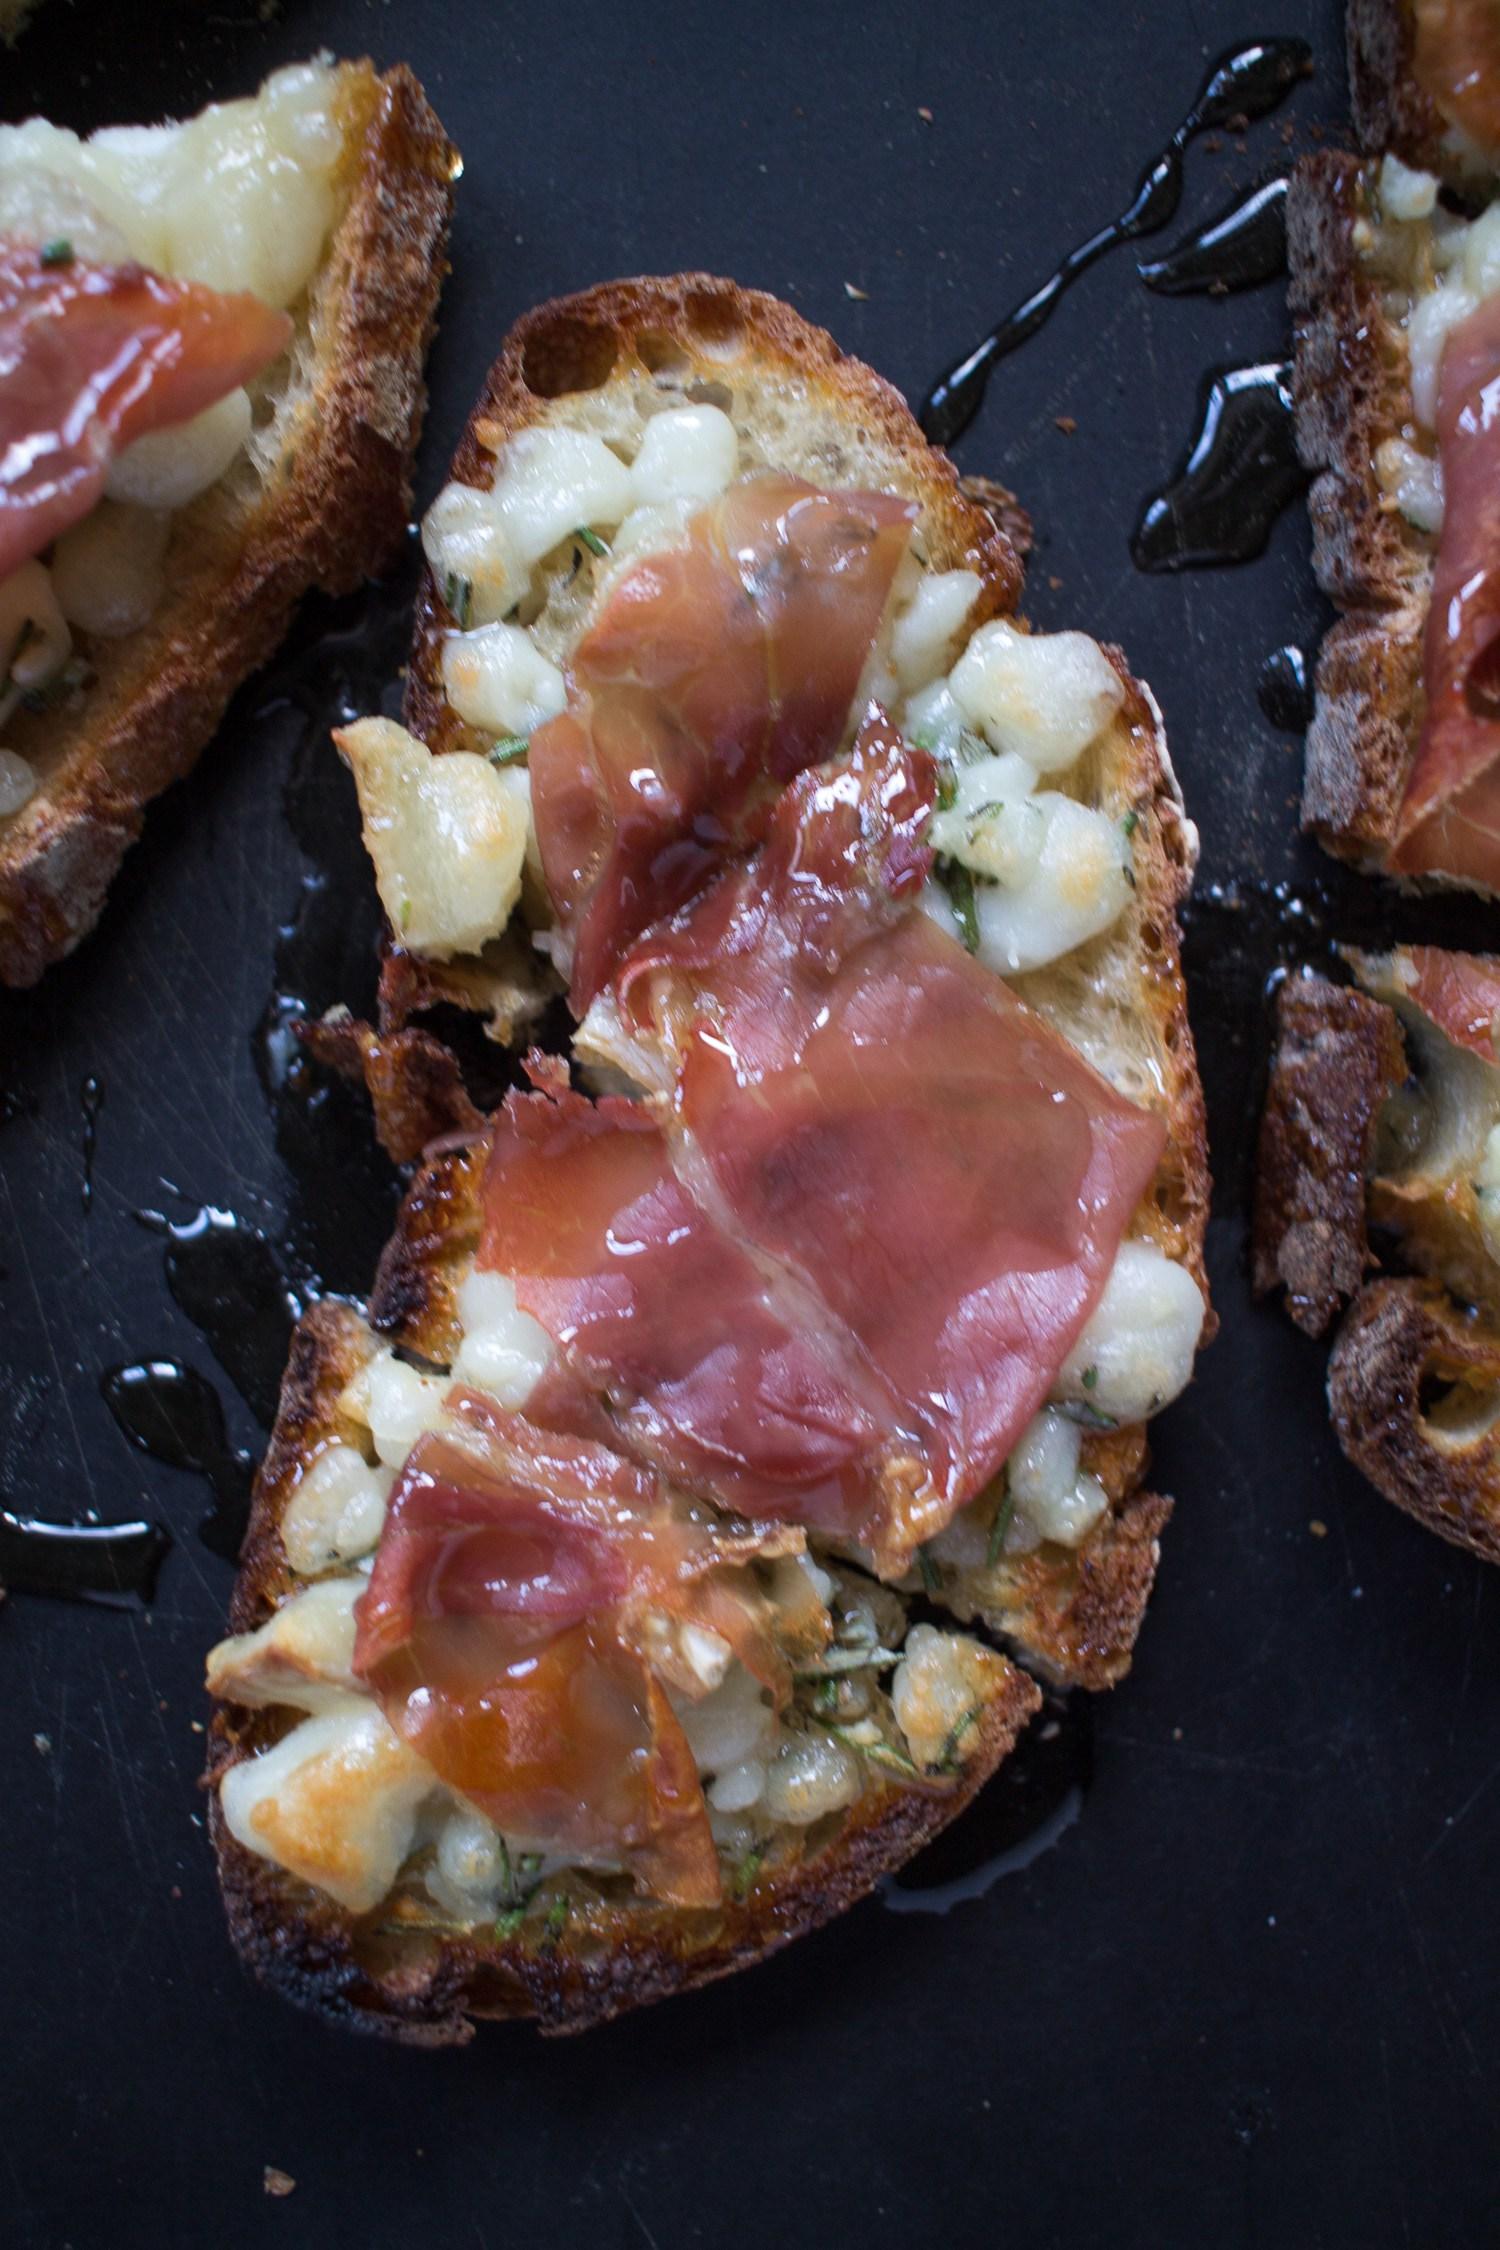 My favorite from this week's Linky Party comes from The Kittchen. "Goat Cheese, Rosemary, Honey, and Prosciutto Toasts ... is... incredibly easy to prepare, bursting with flavor, and elegant enough for a dinner party."